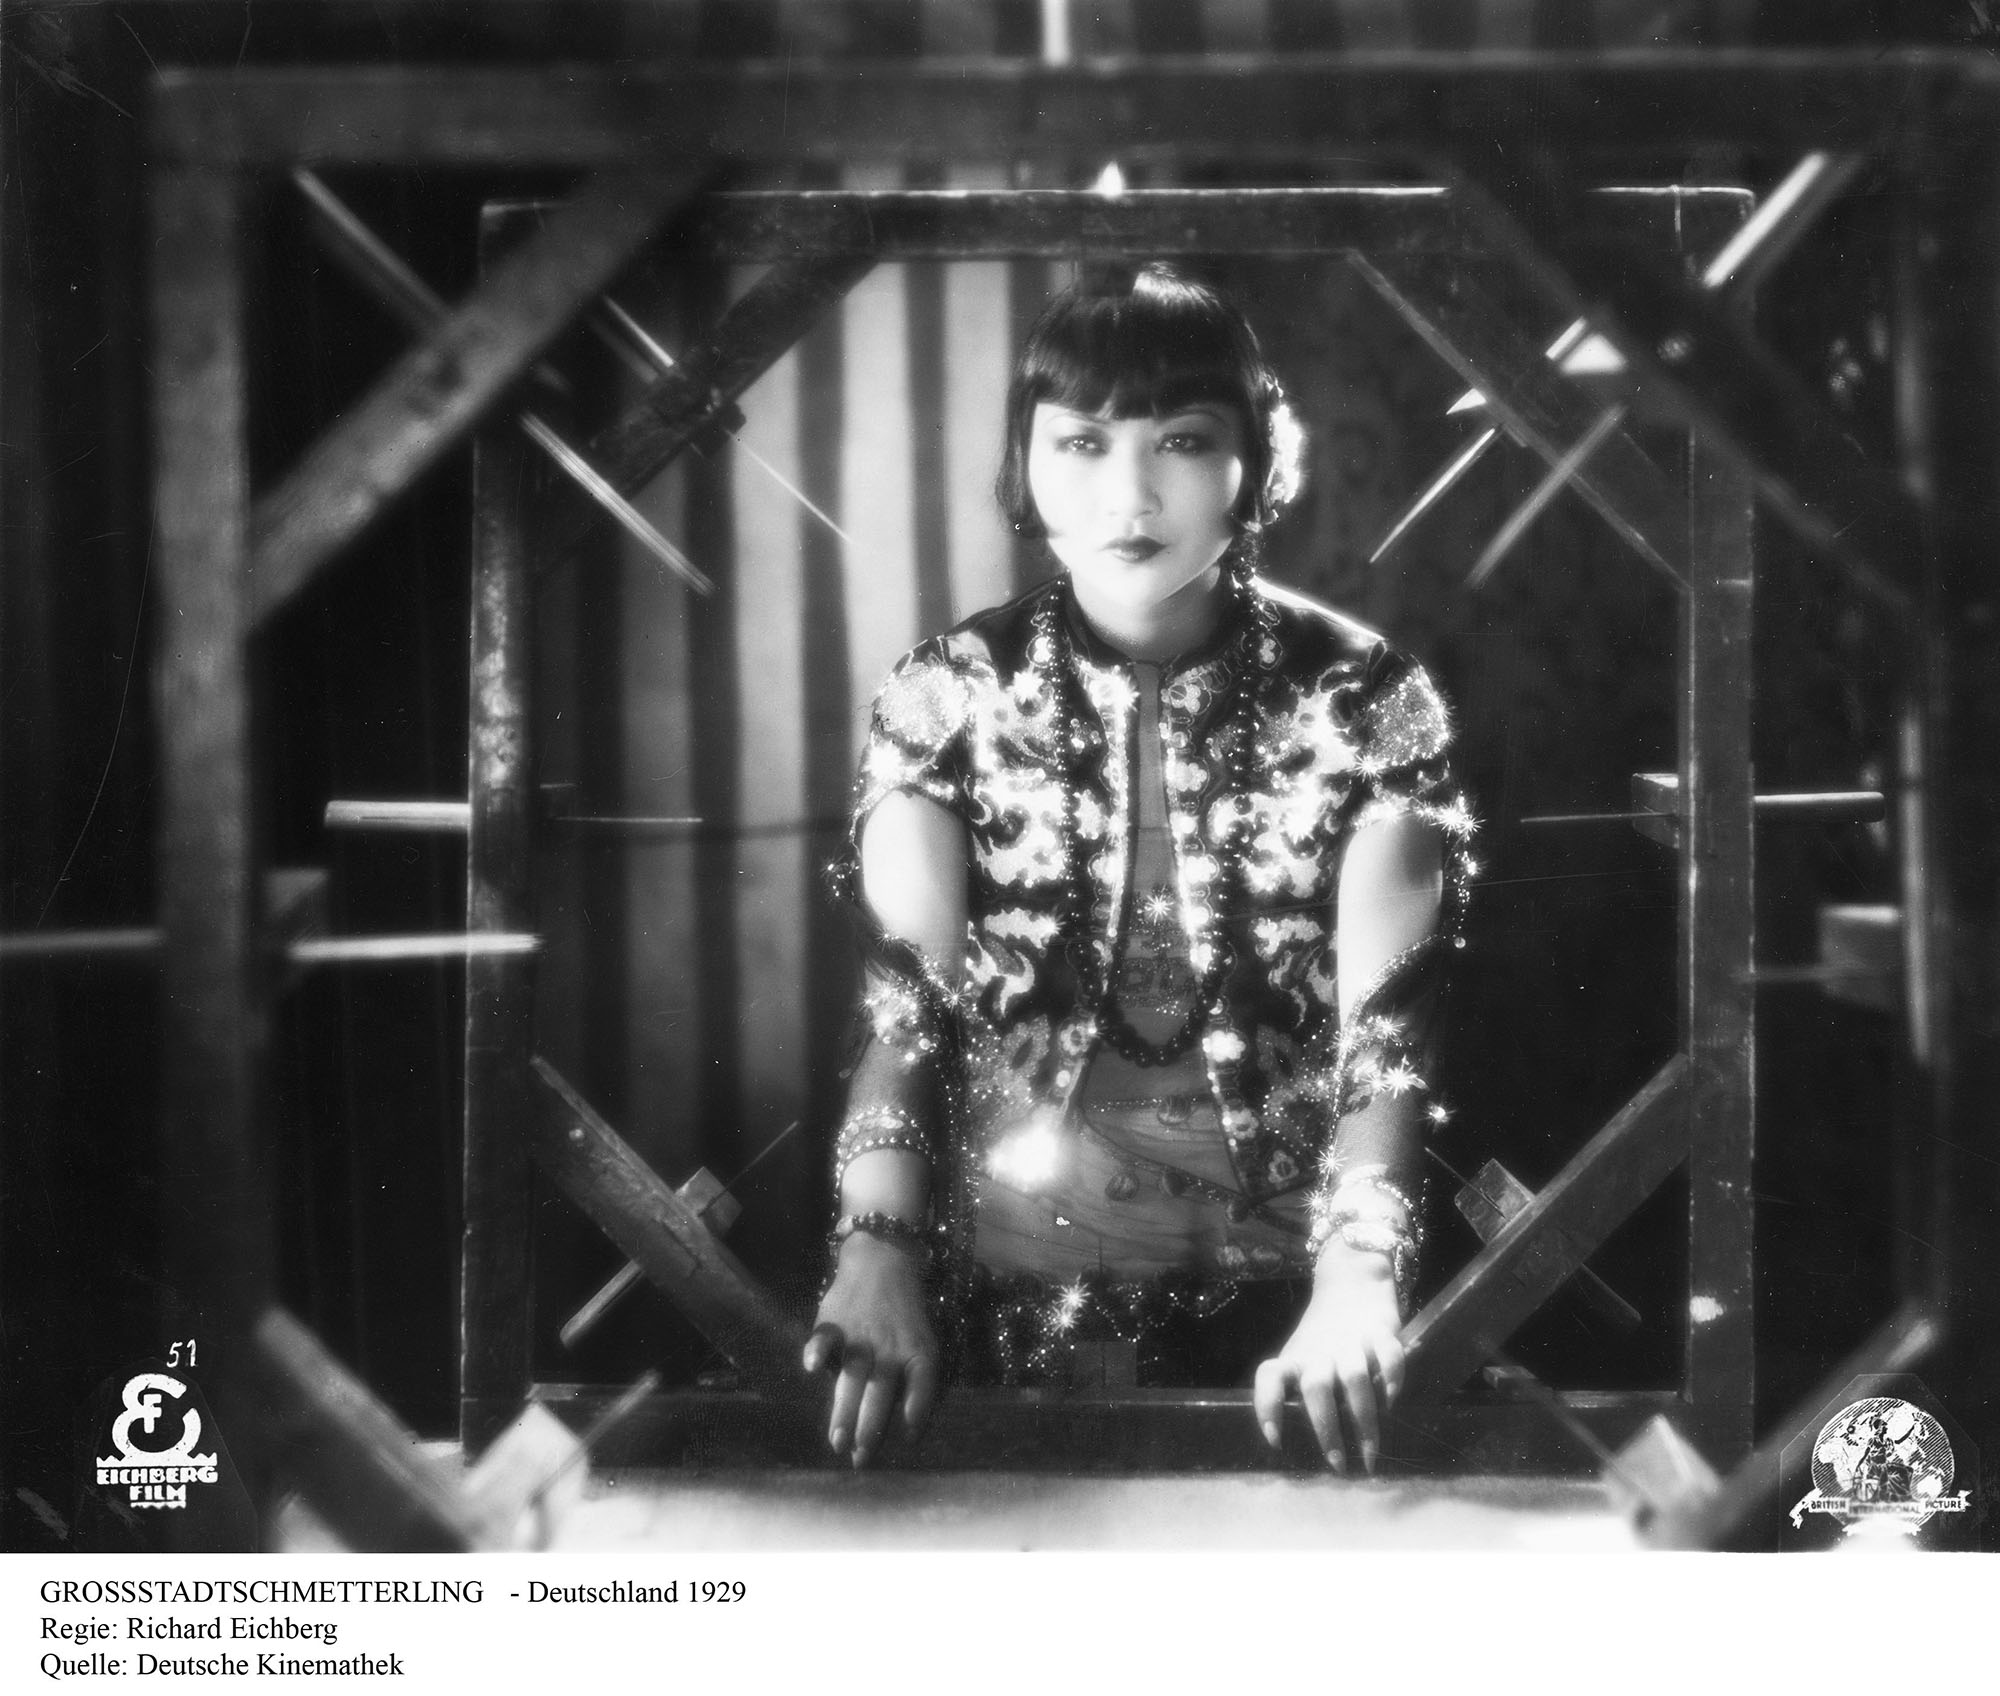 A black-white shot of Anna May Wong from the movie "Großstadtschmetterling".